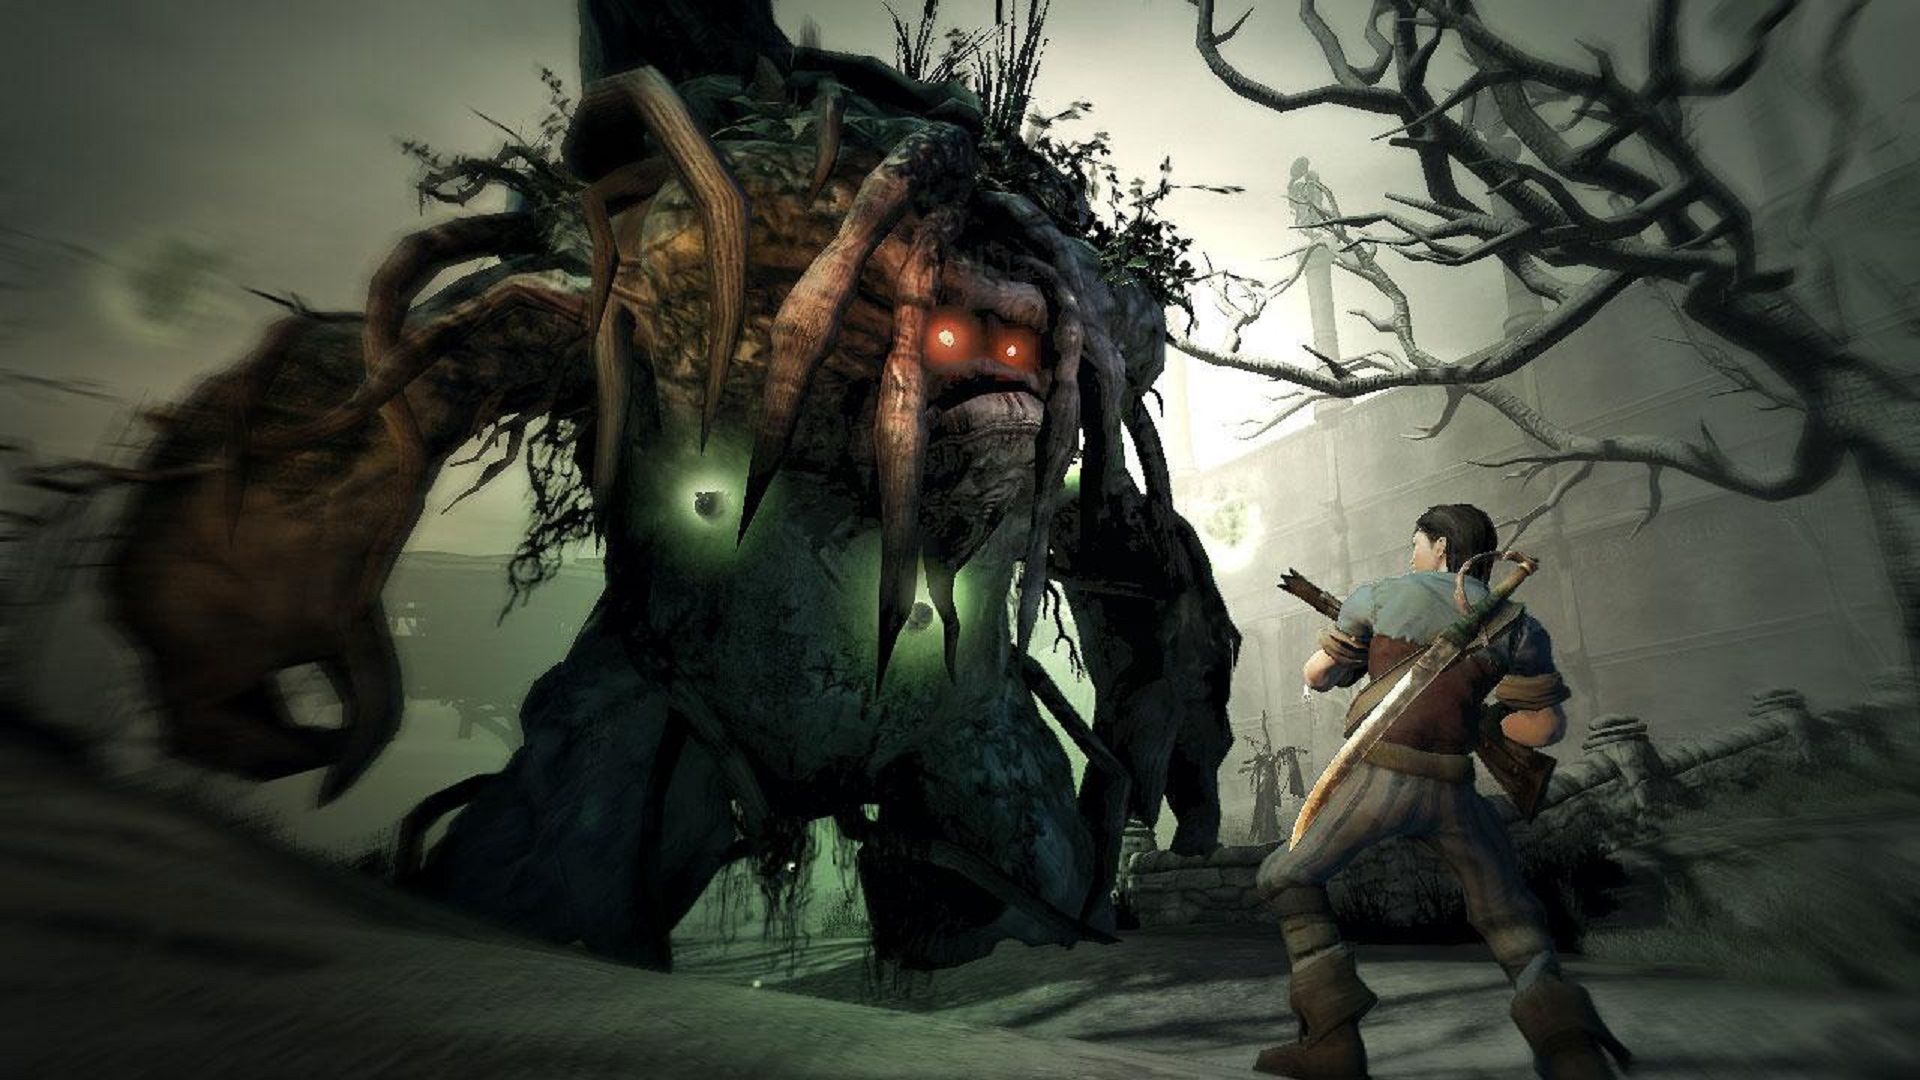 fable 2 for pc download